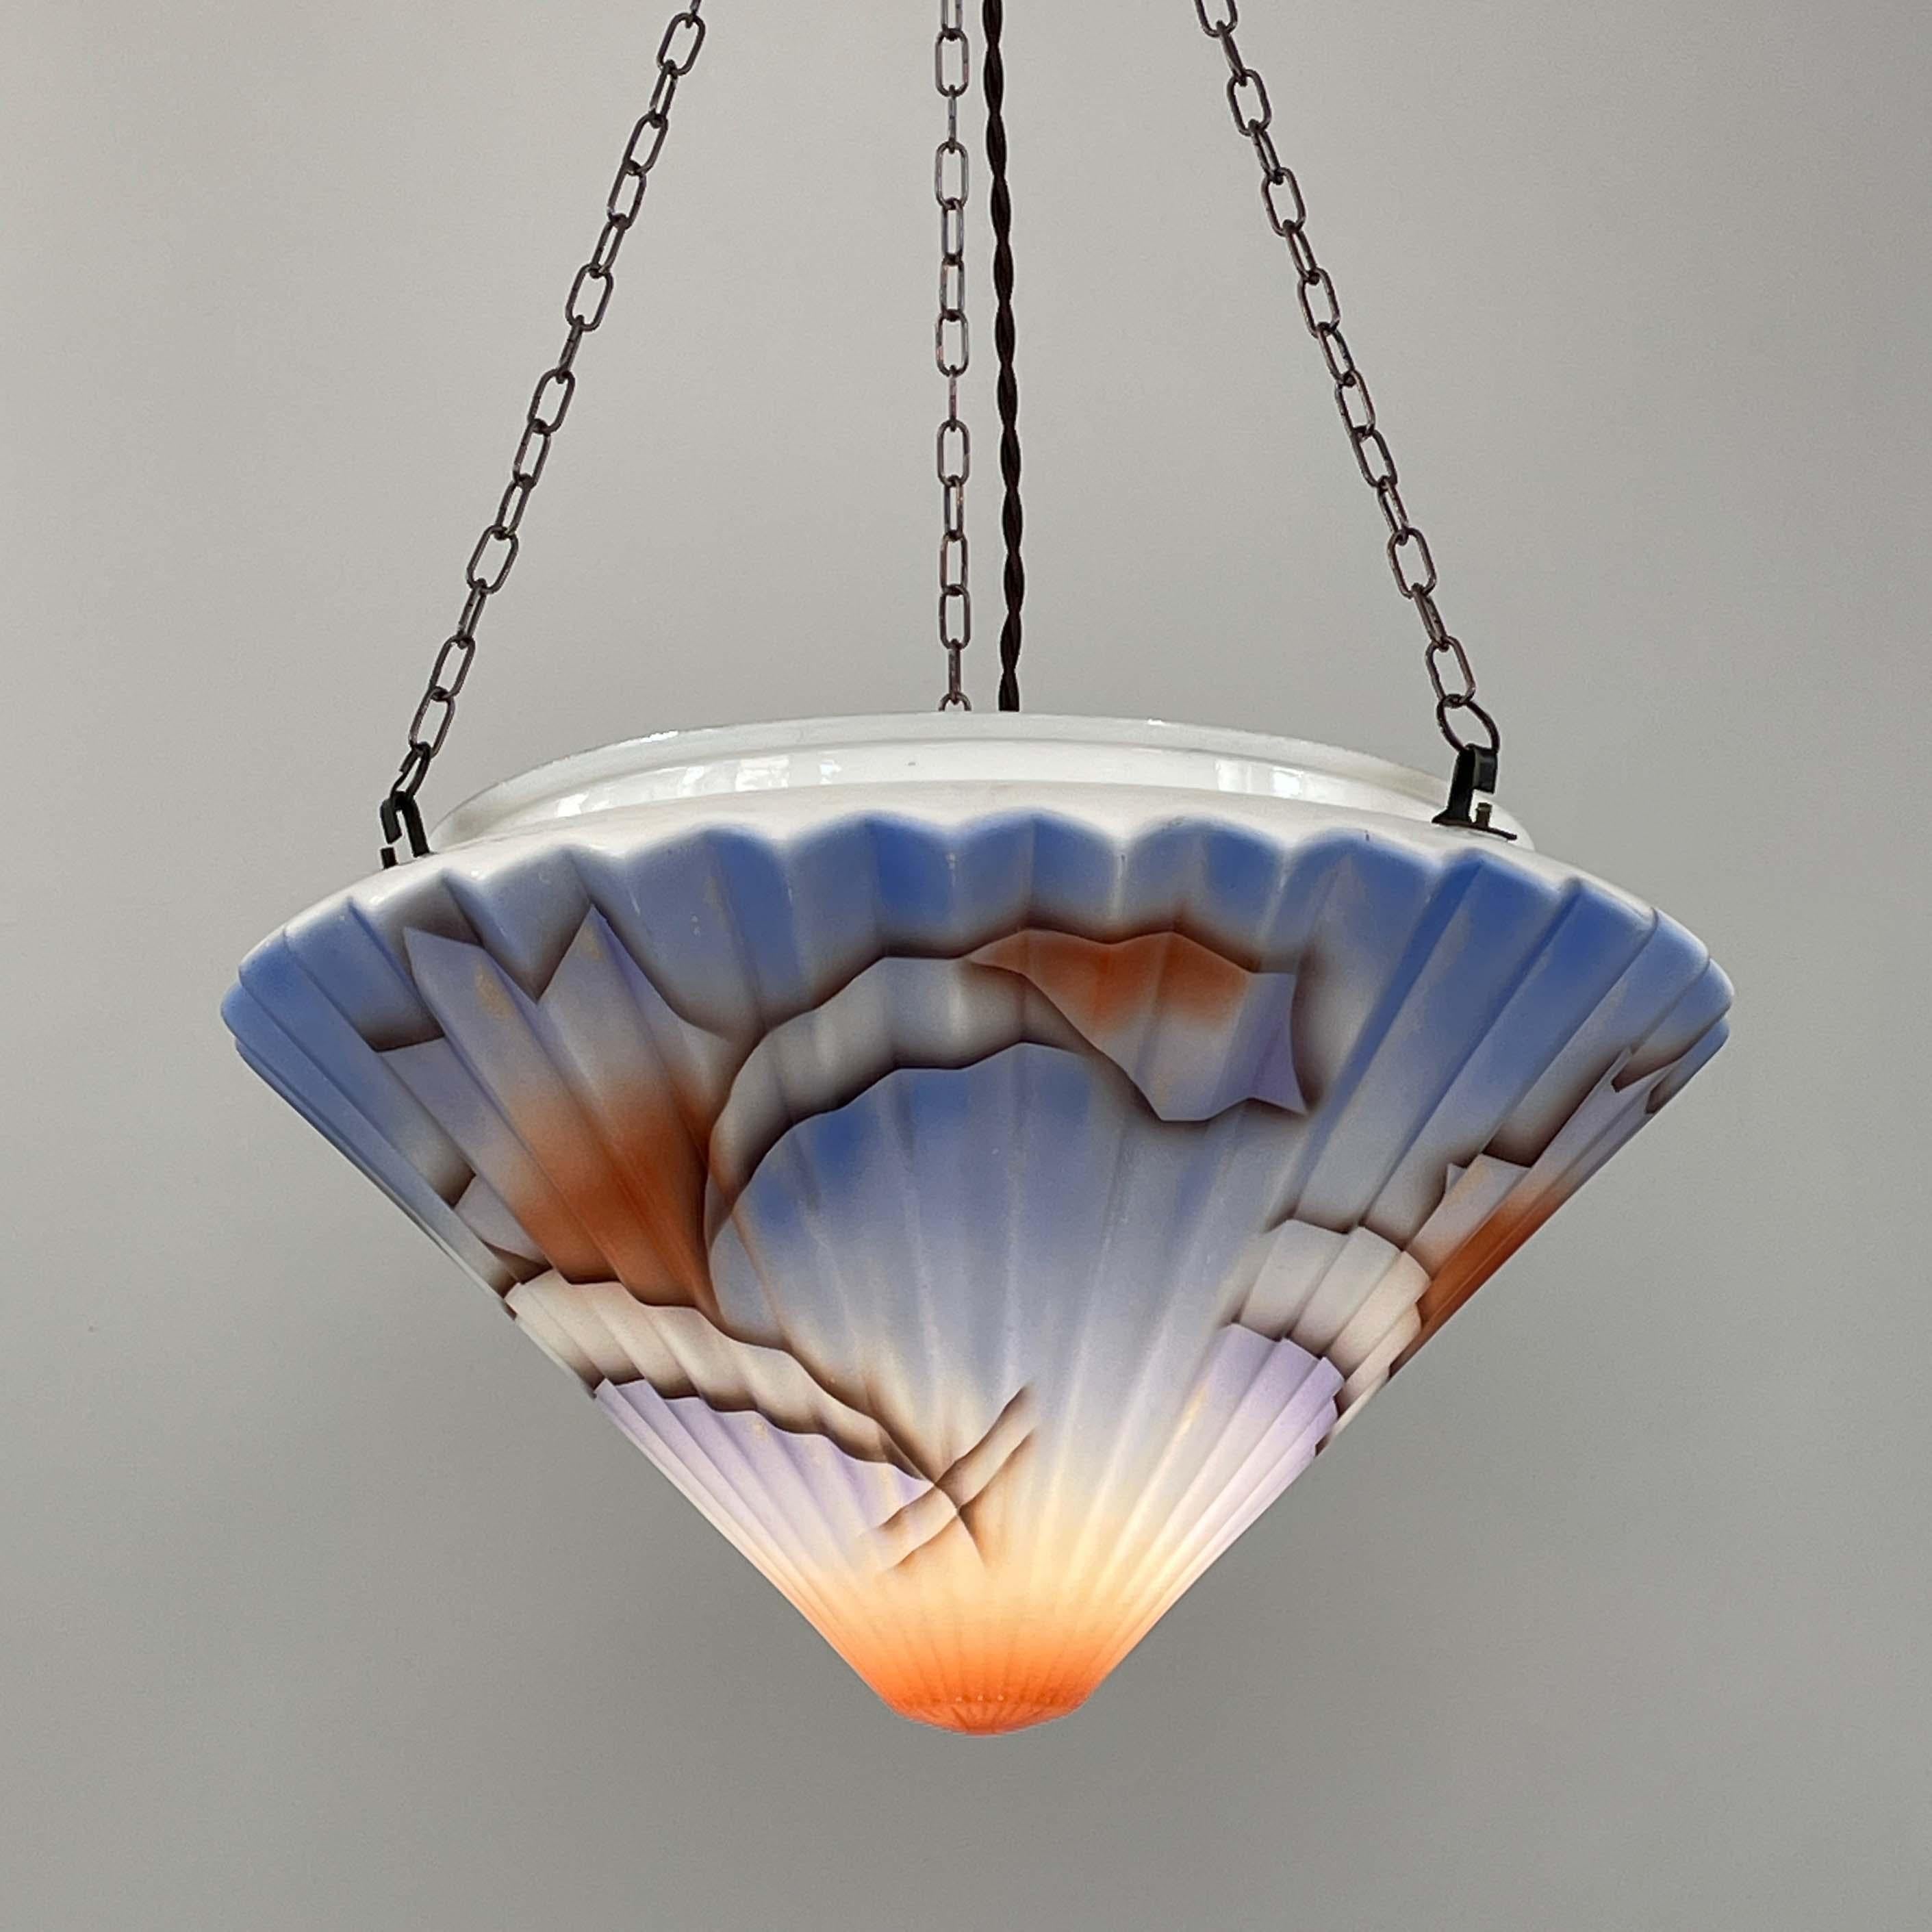 Mid-20th Century Art Deco Suspension Light, Enameled Glass and Bronzed Brass, Germany 1930s For Sale